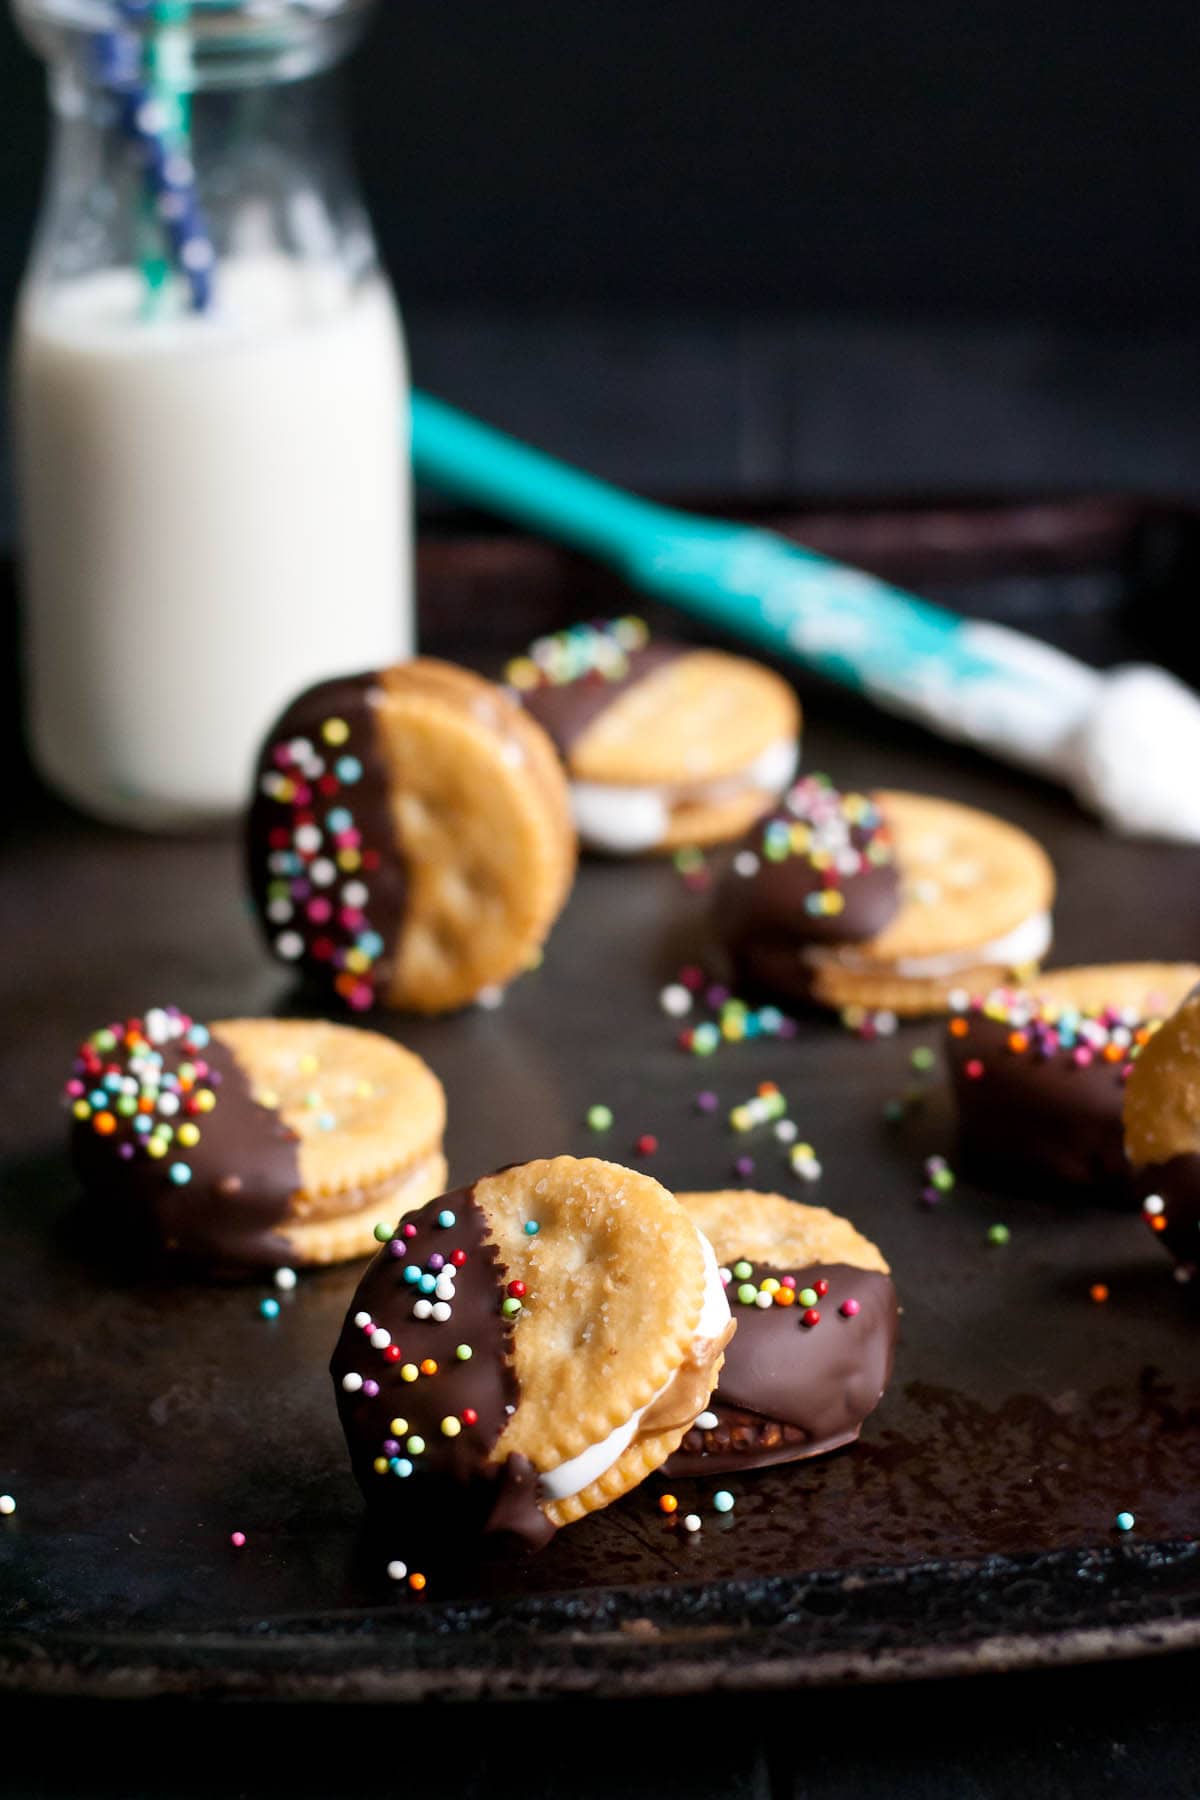 Four ingredients is all you need to make these addictive Chocolate Dipped Fluffernutter Ritz Cookies!